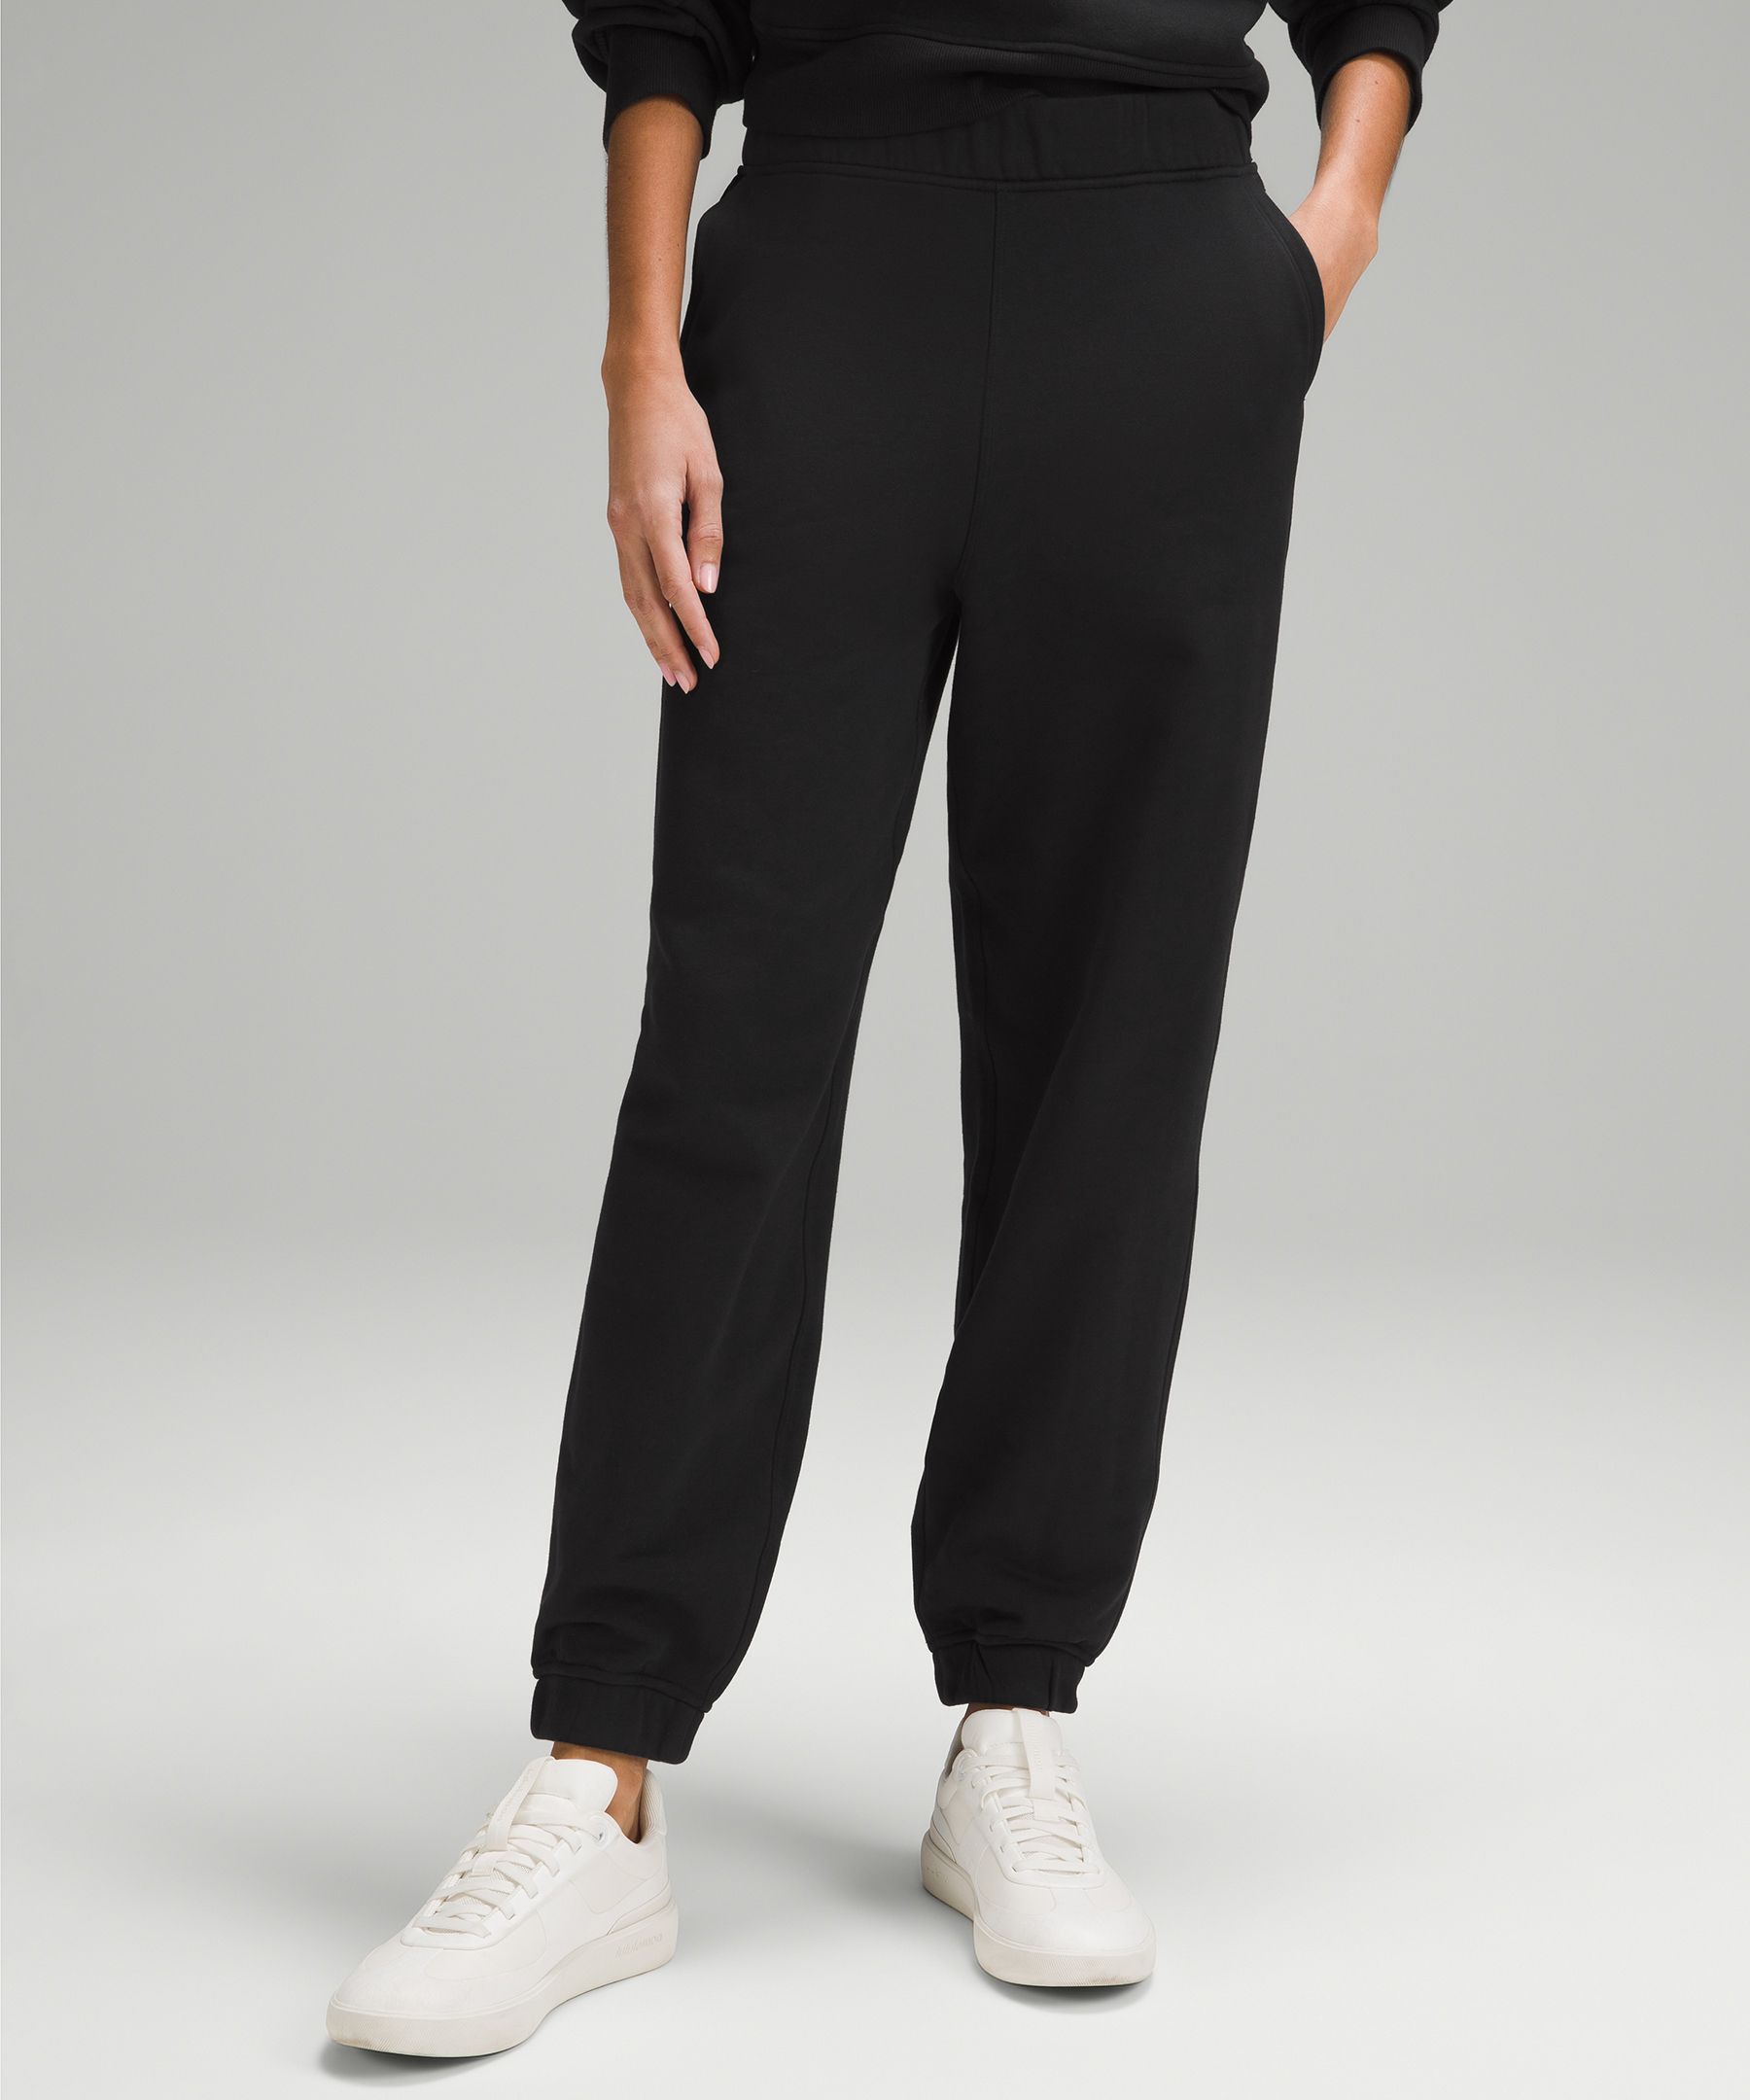 Relaxed fit, Women's Leggings & Joggers